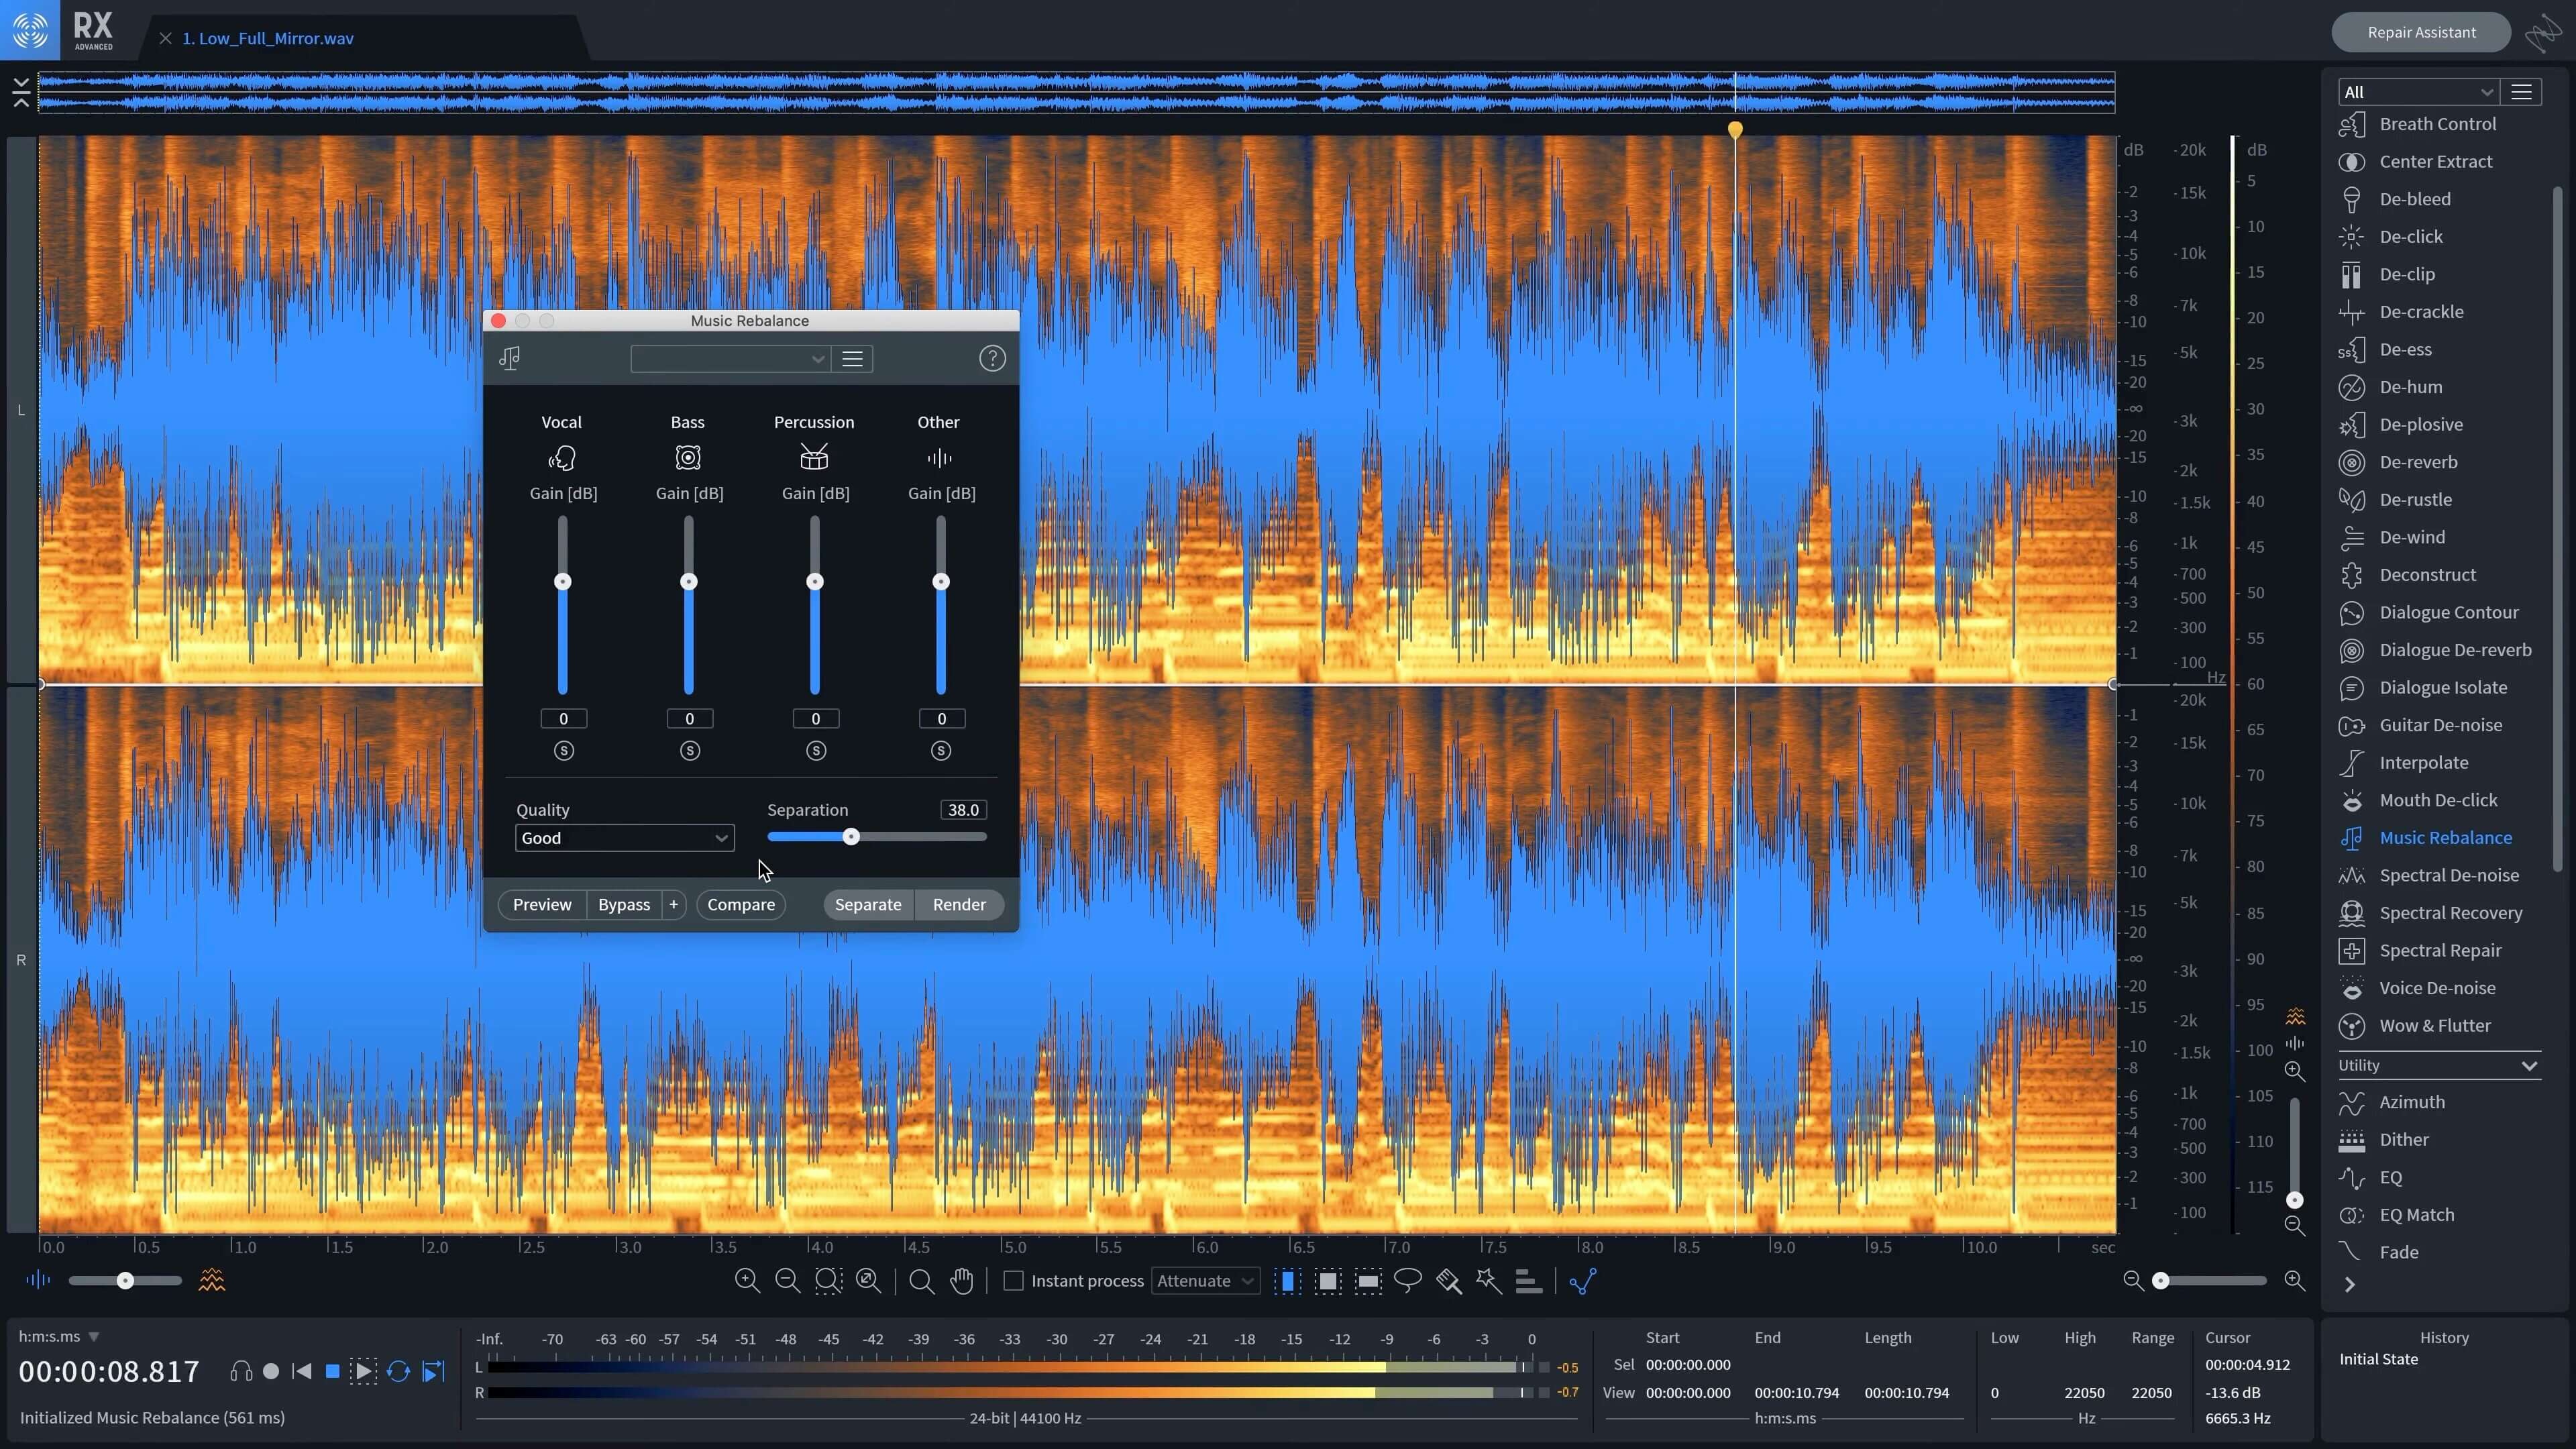 izotope rx 7 free download full version